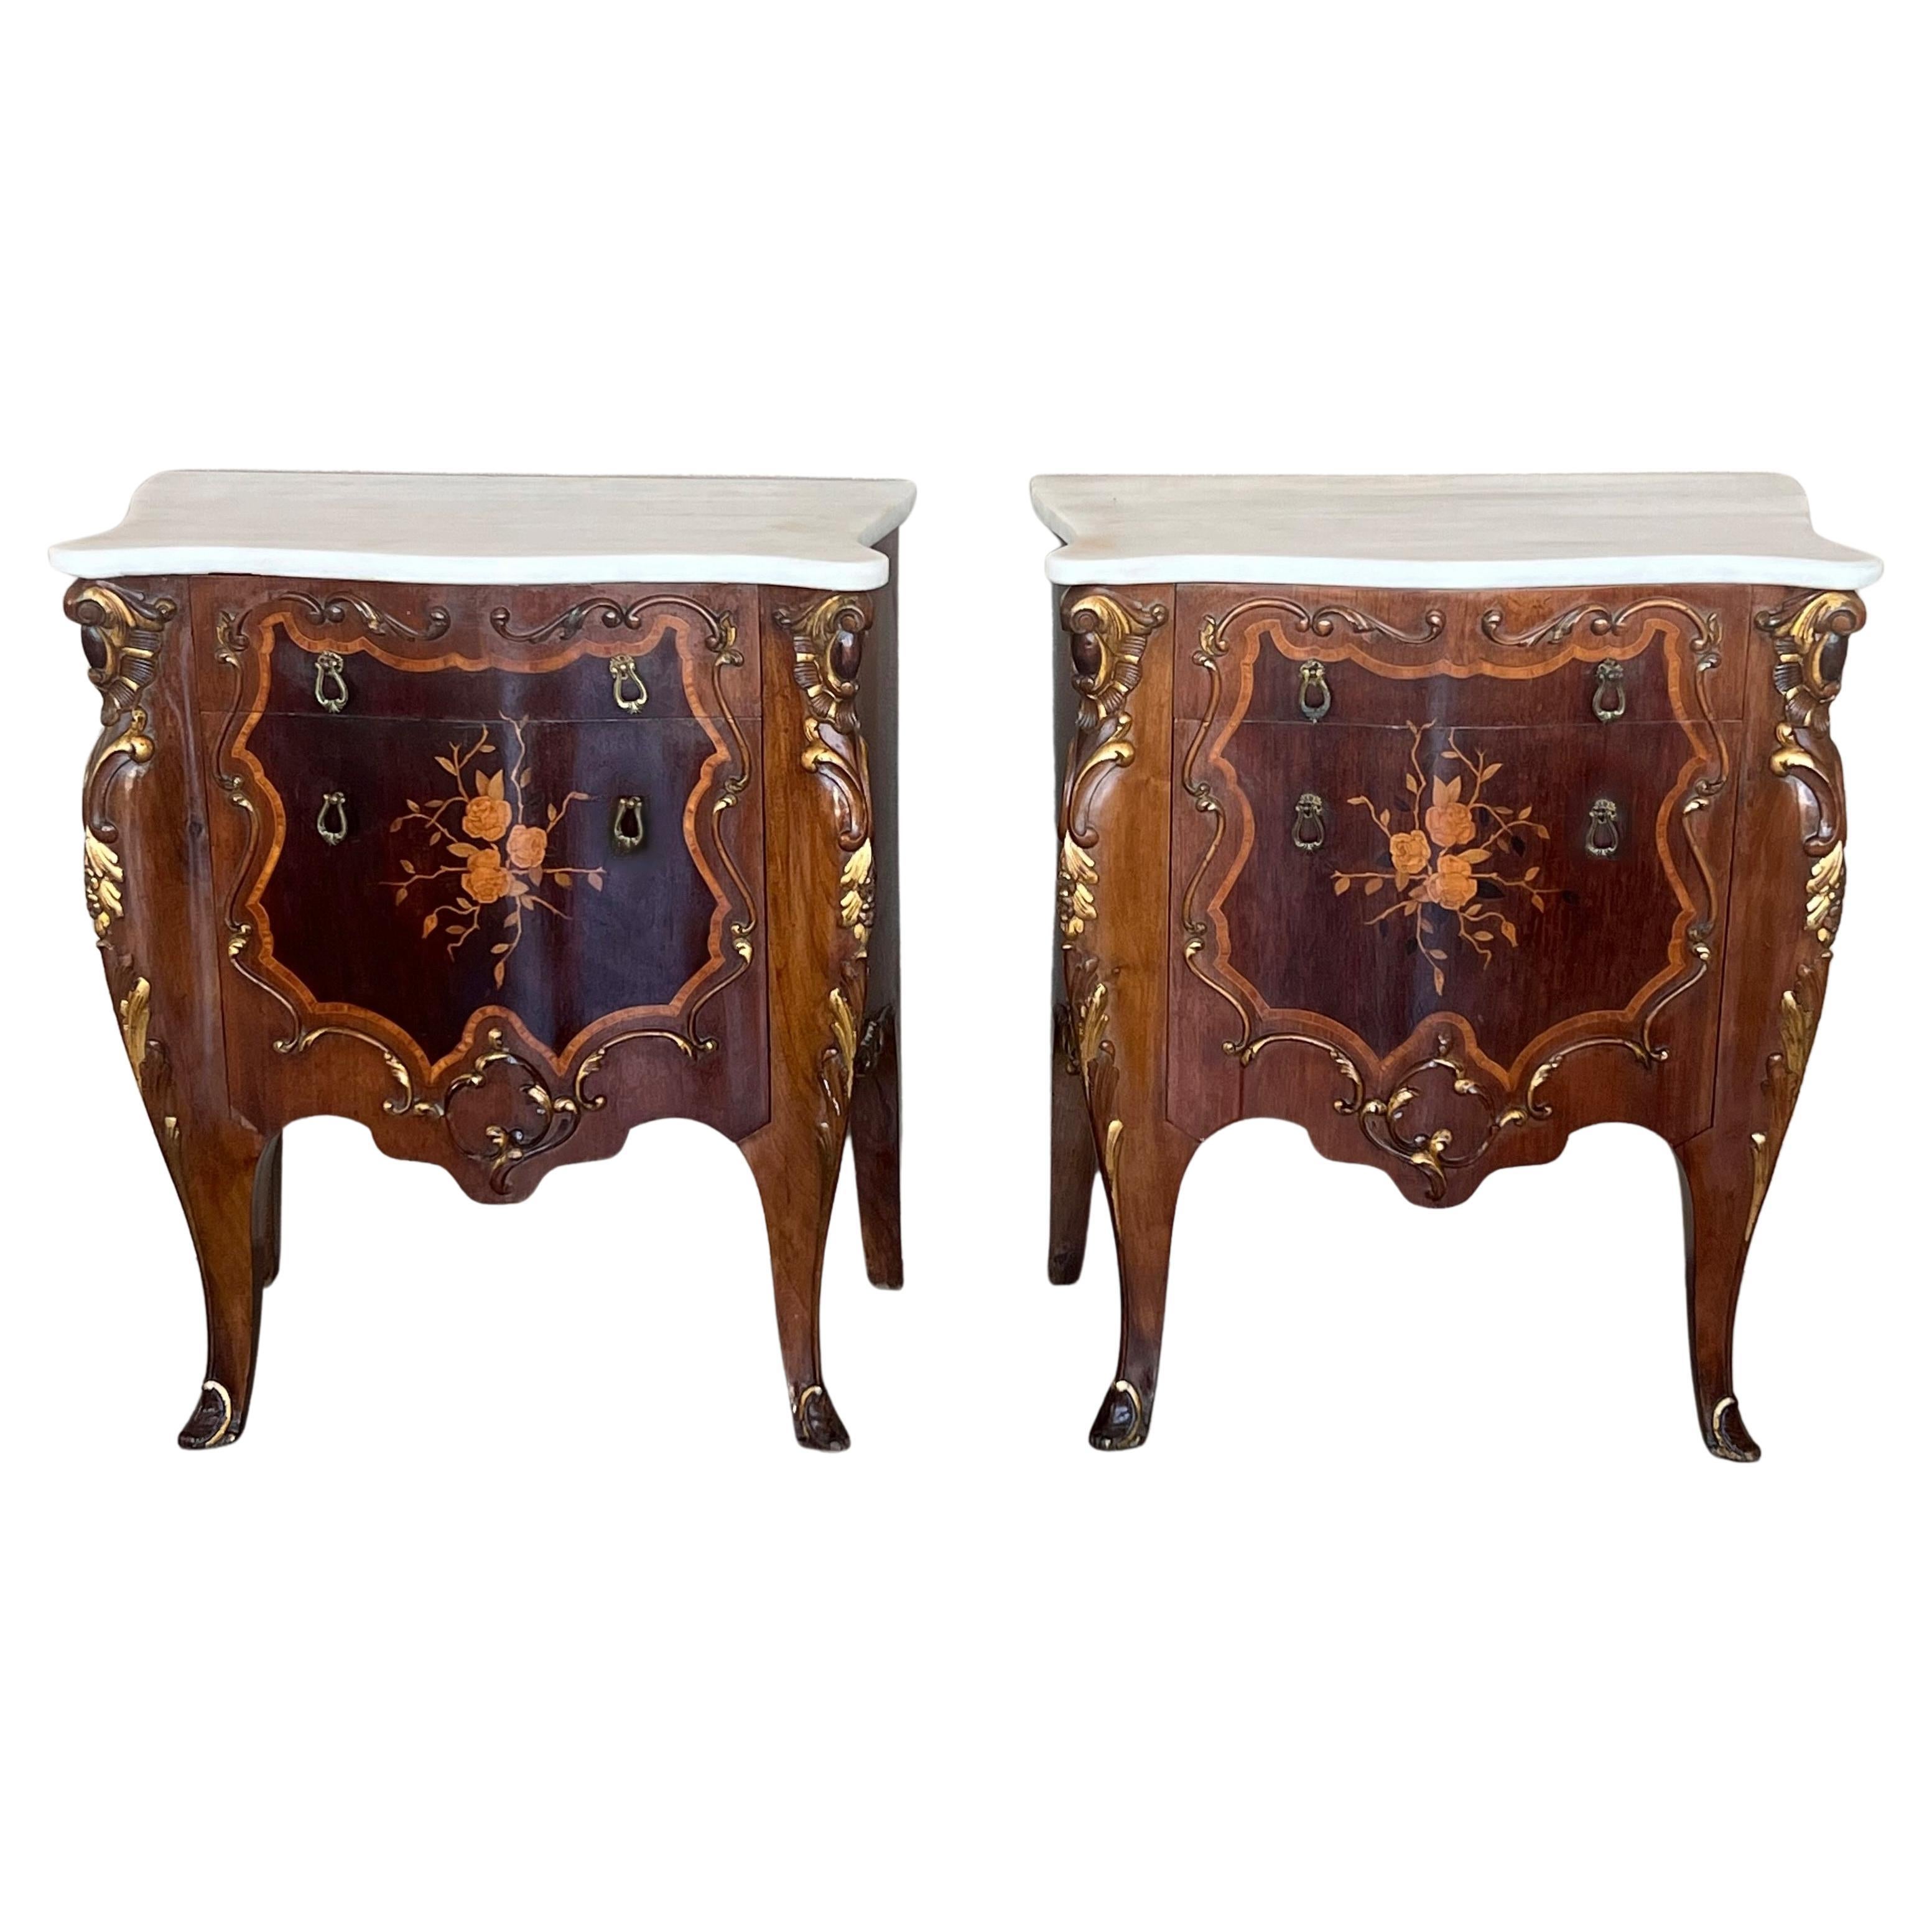 French Louis XV Marquetry Marble-Top Nightstand or Side Tables